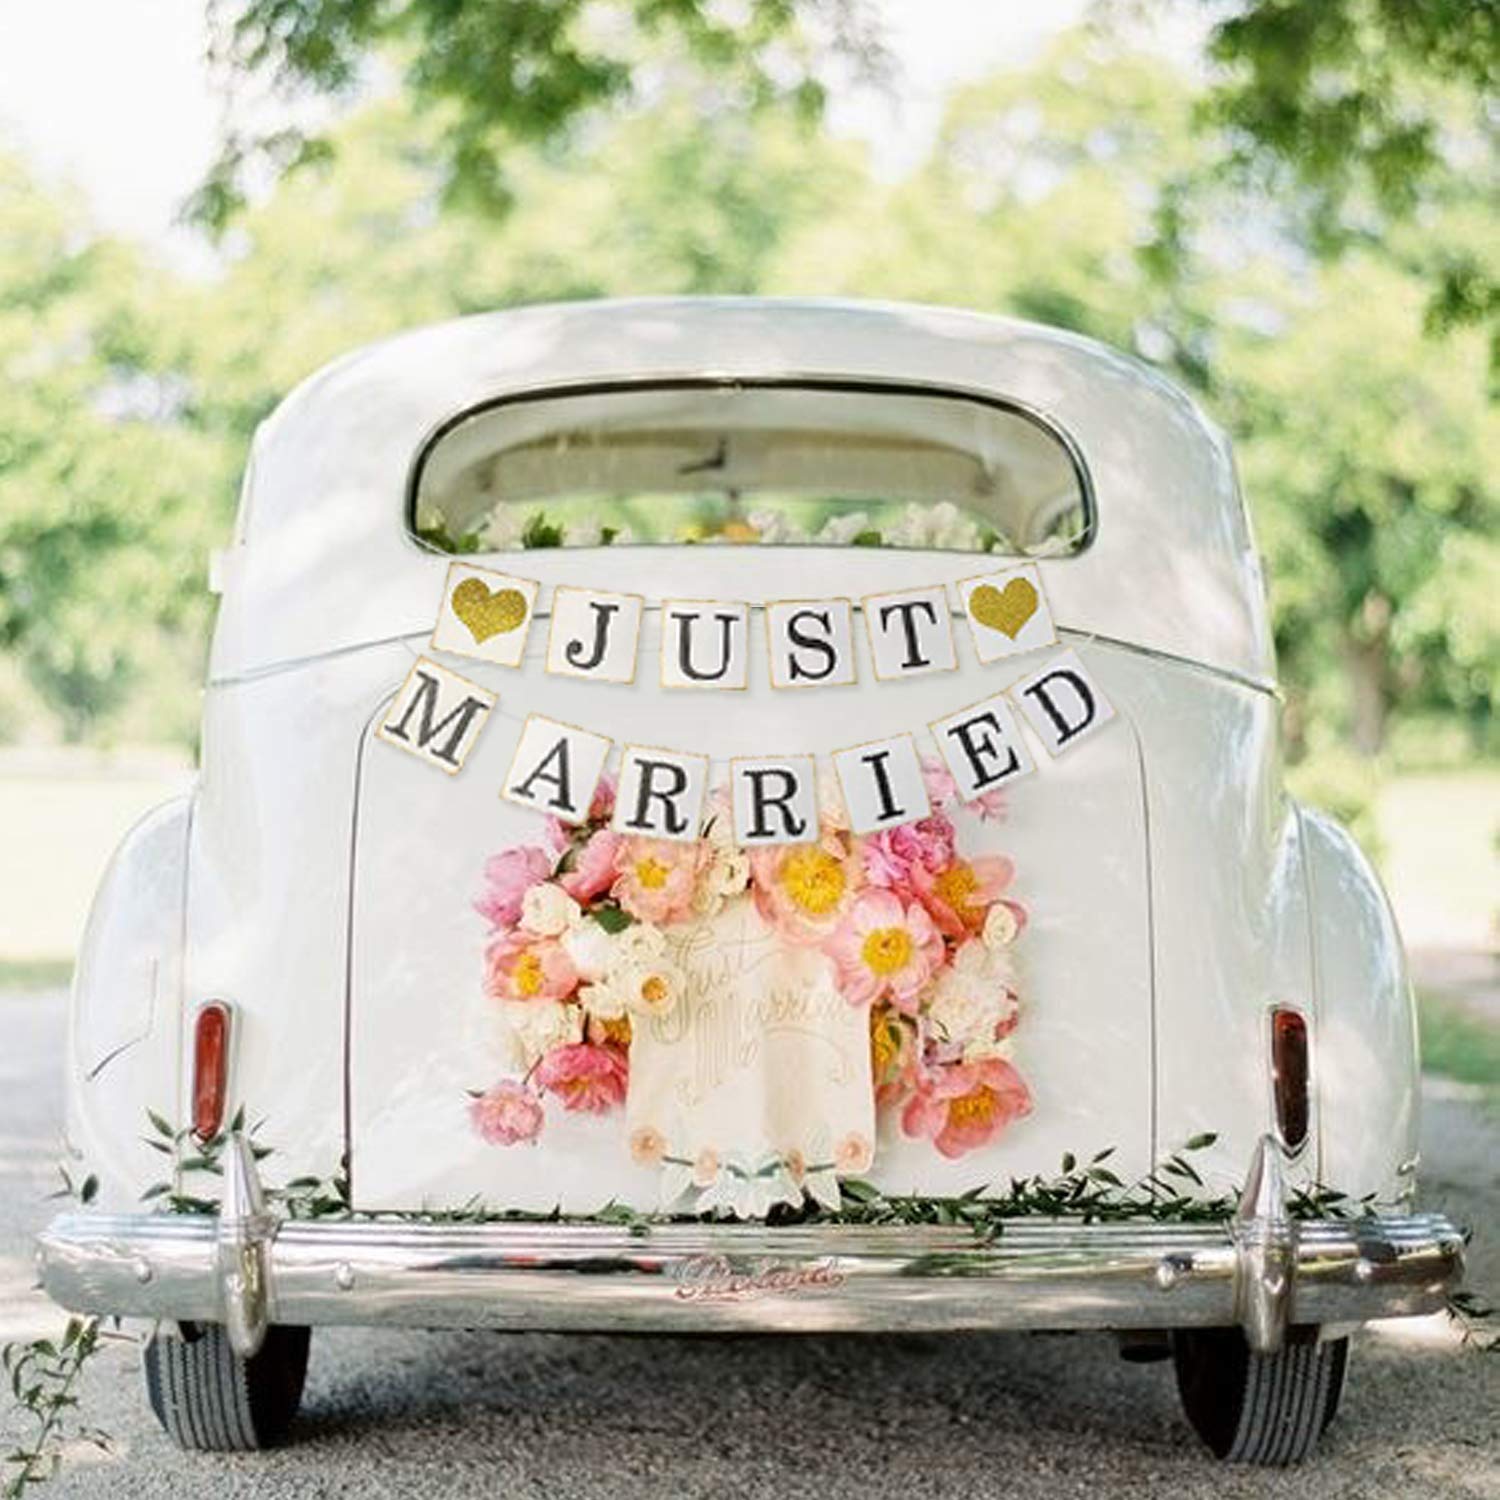 Just Married car decoration ideas